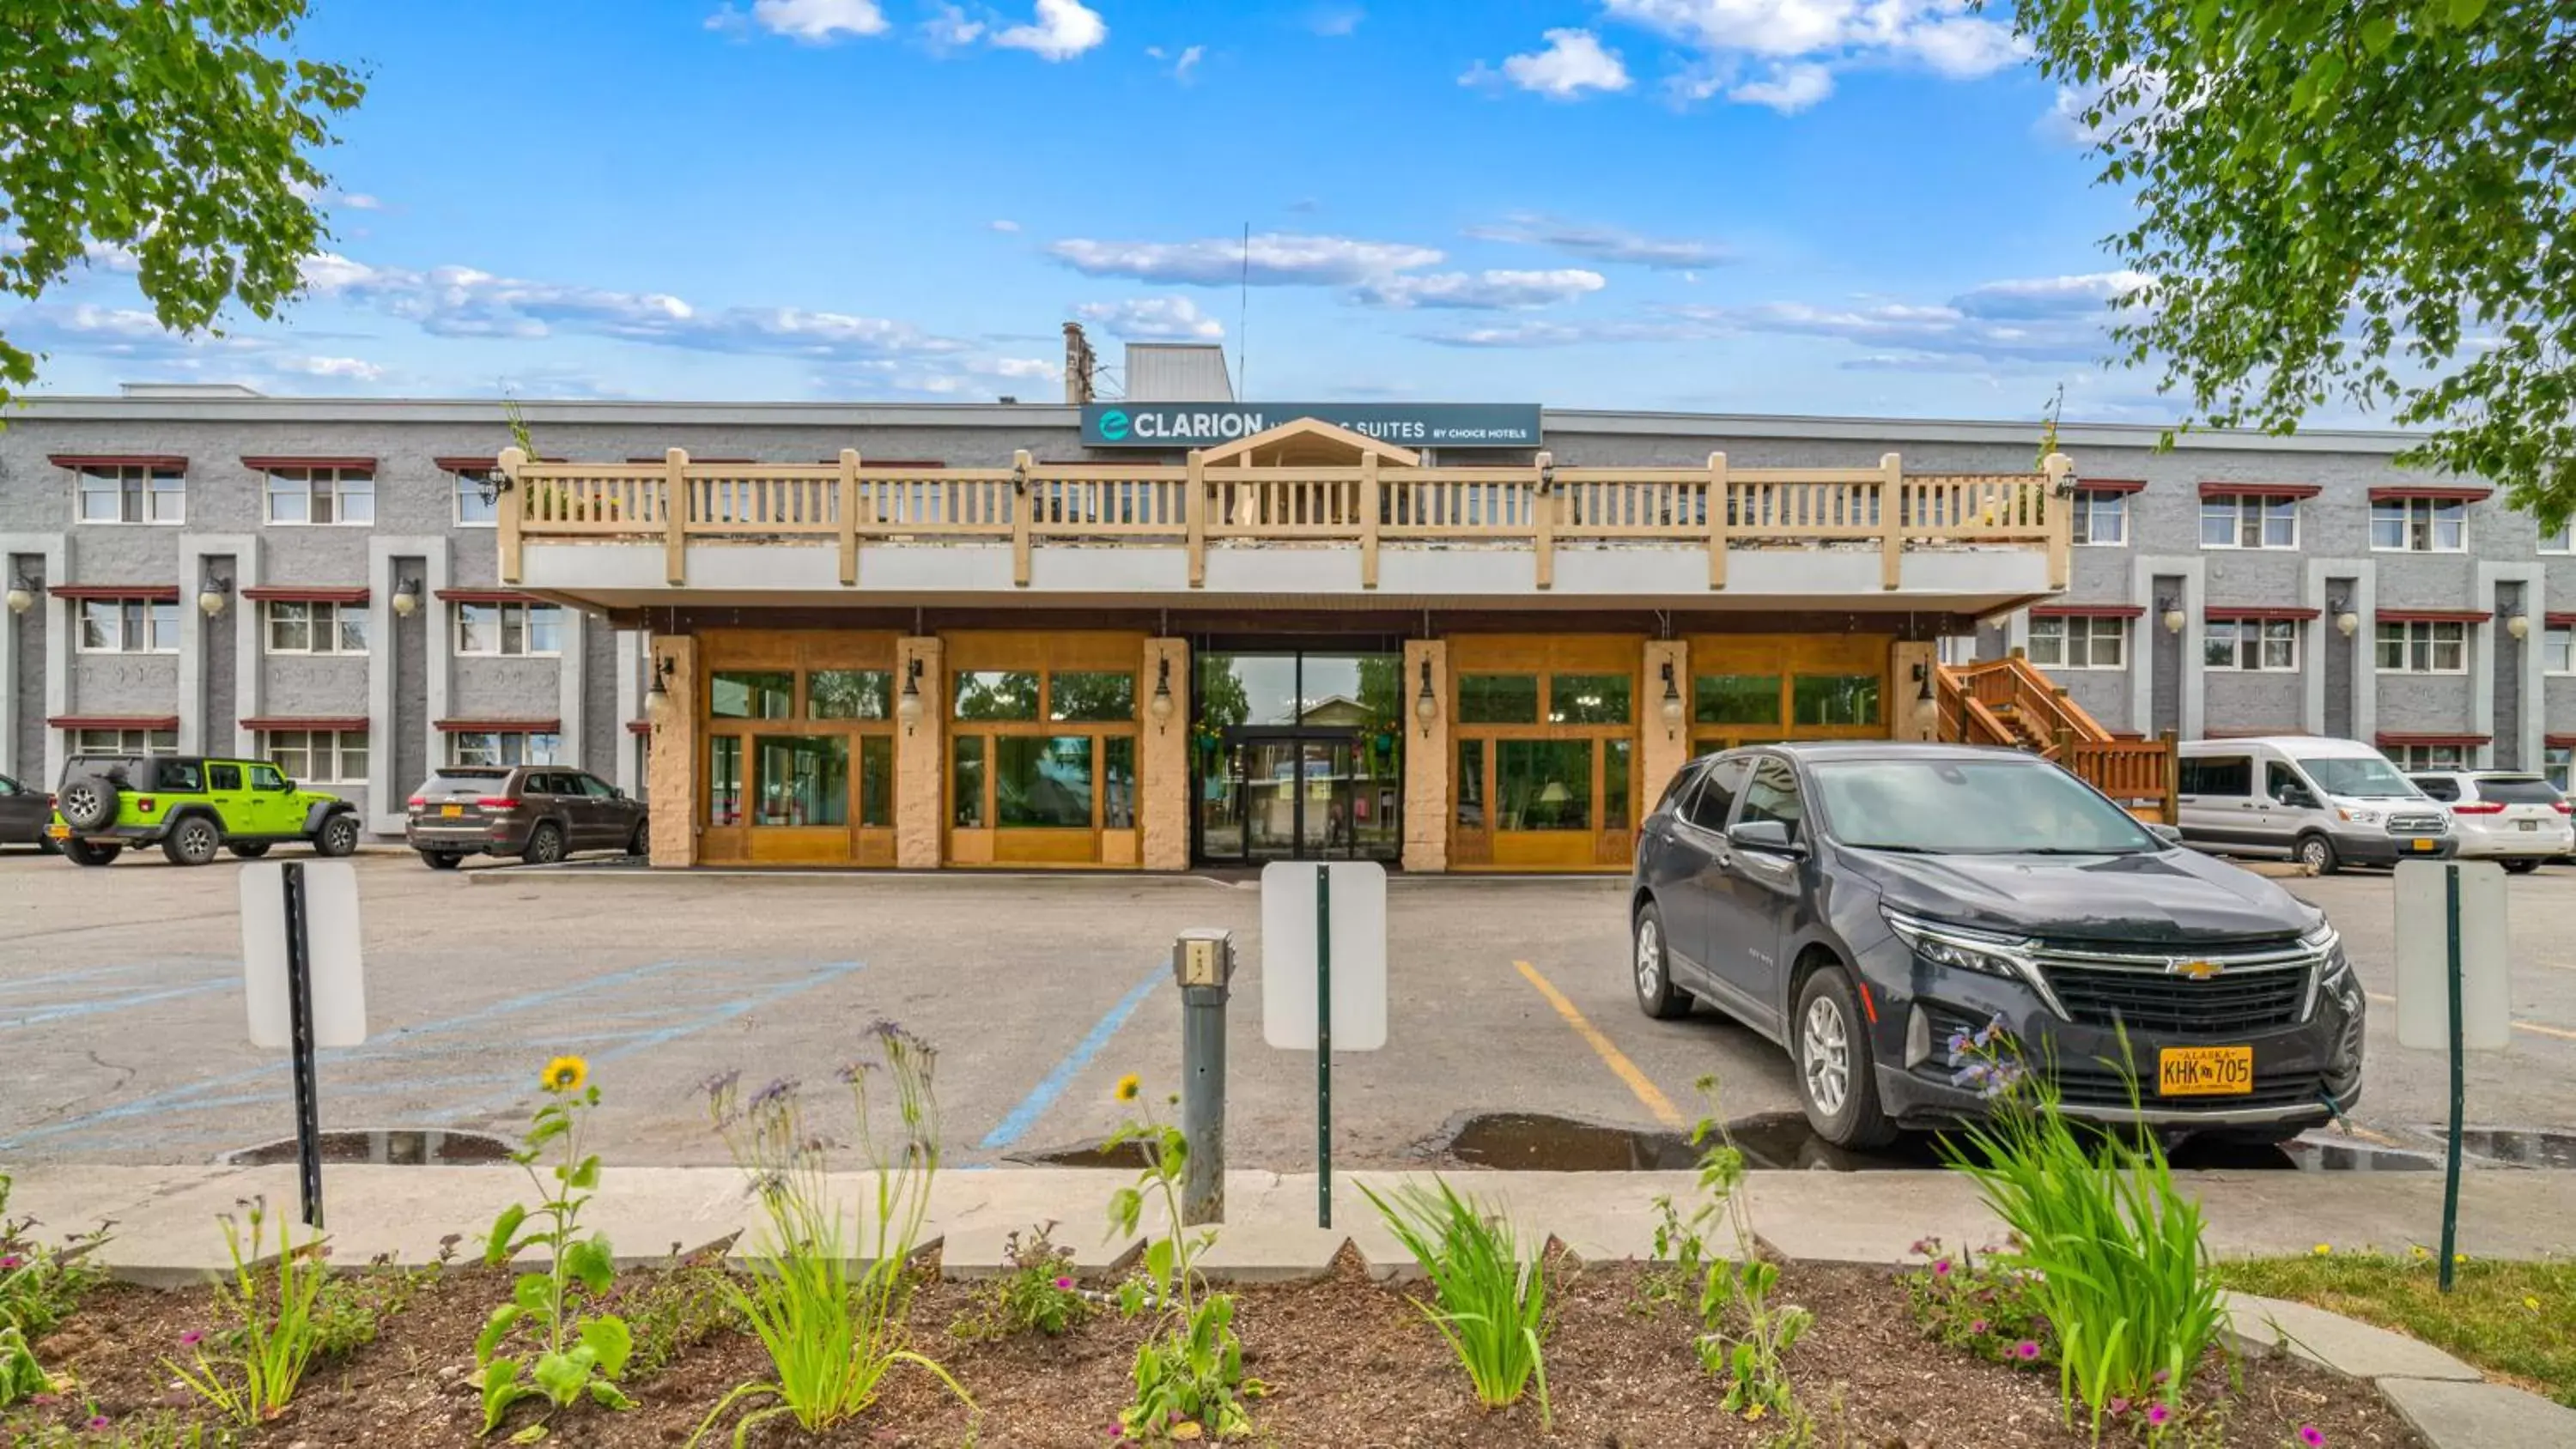 Facade/entrance, Property Building in Clarion Hotel & Suites Fairbanks near Ft. Wainwright